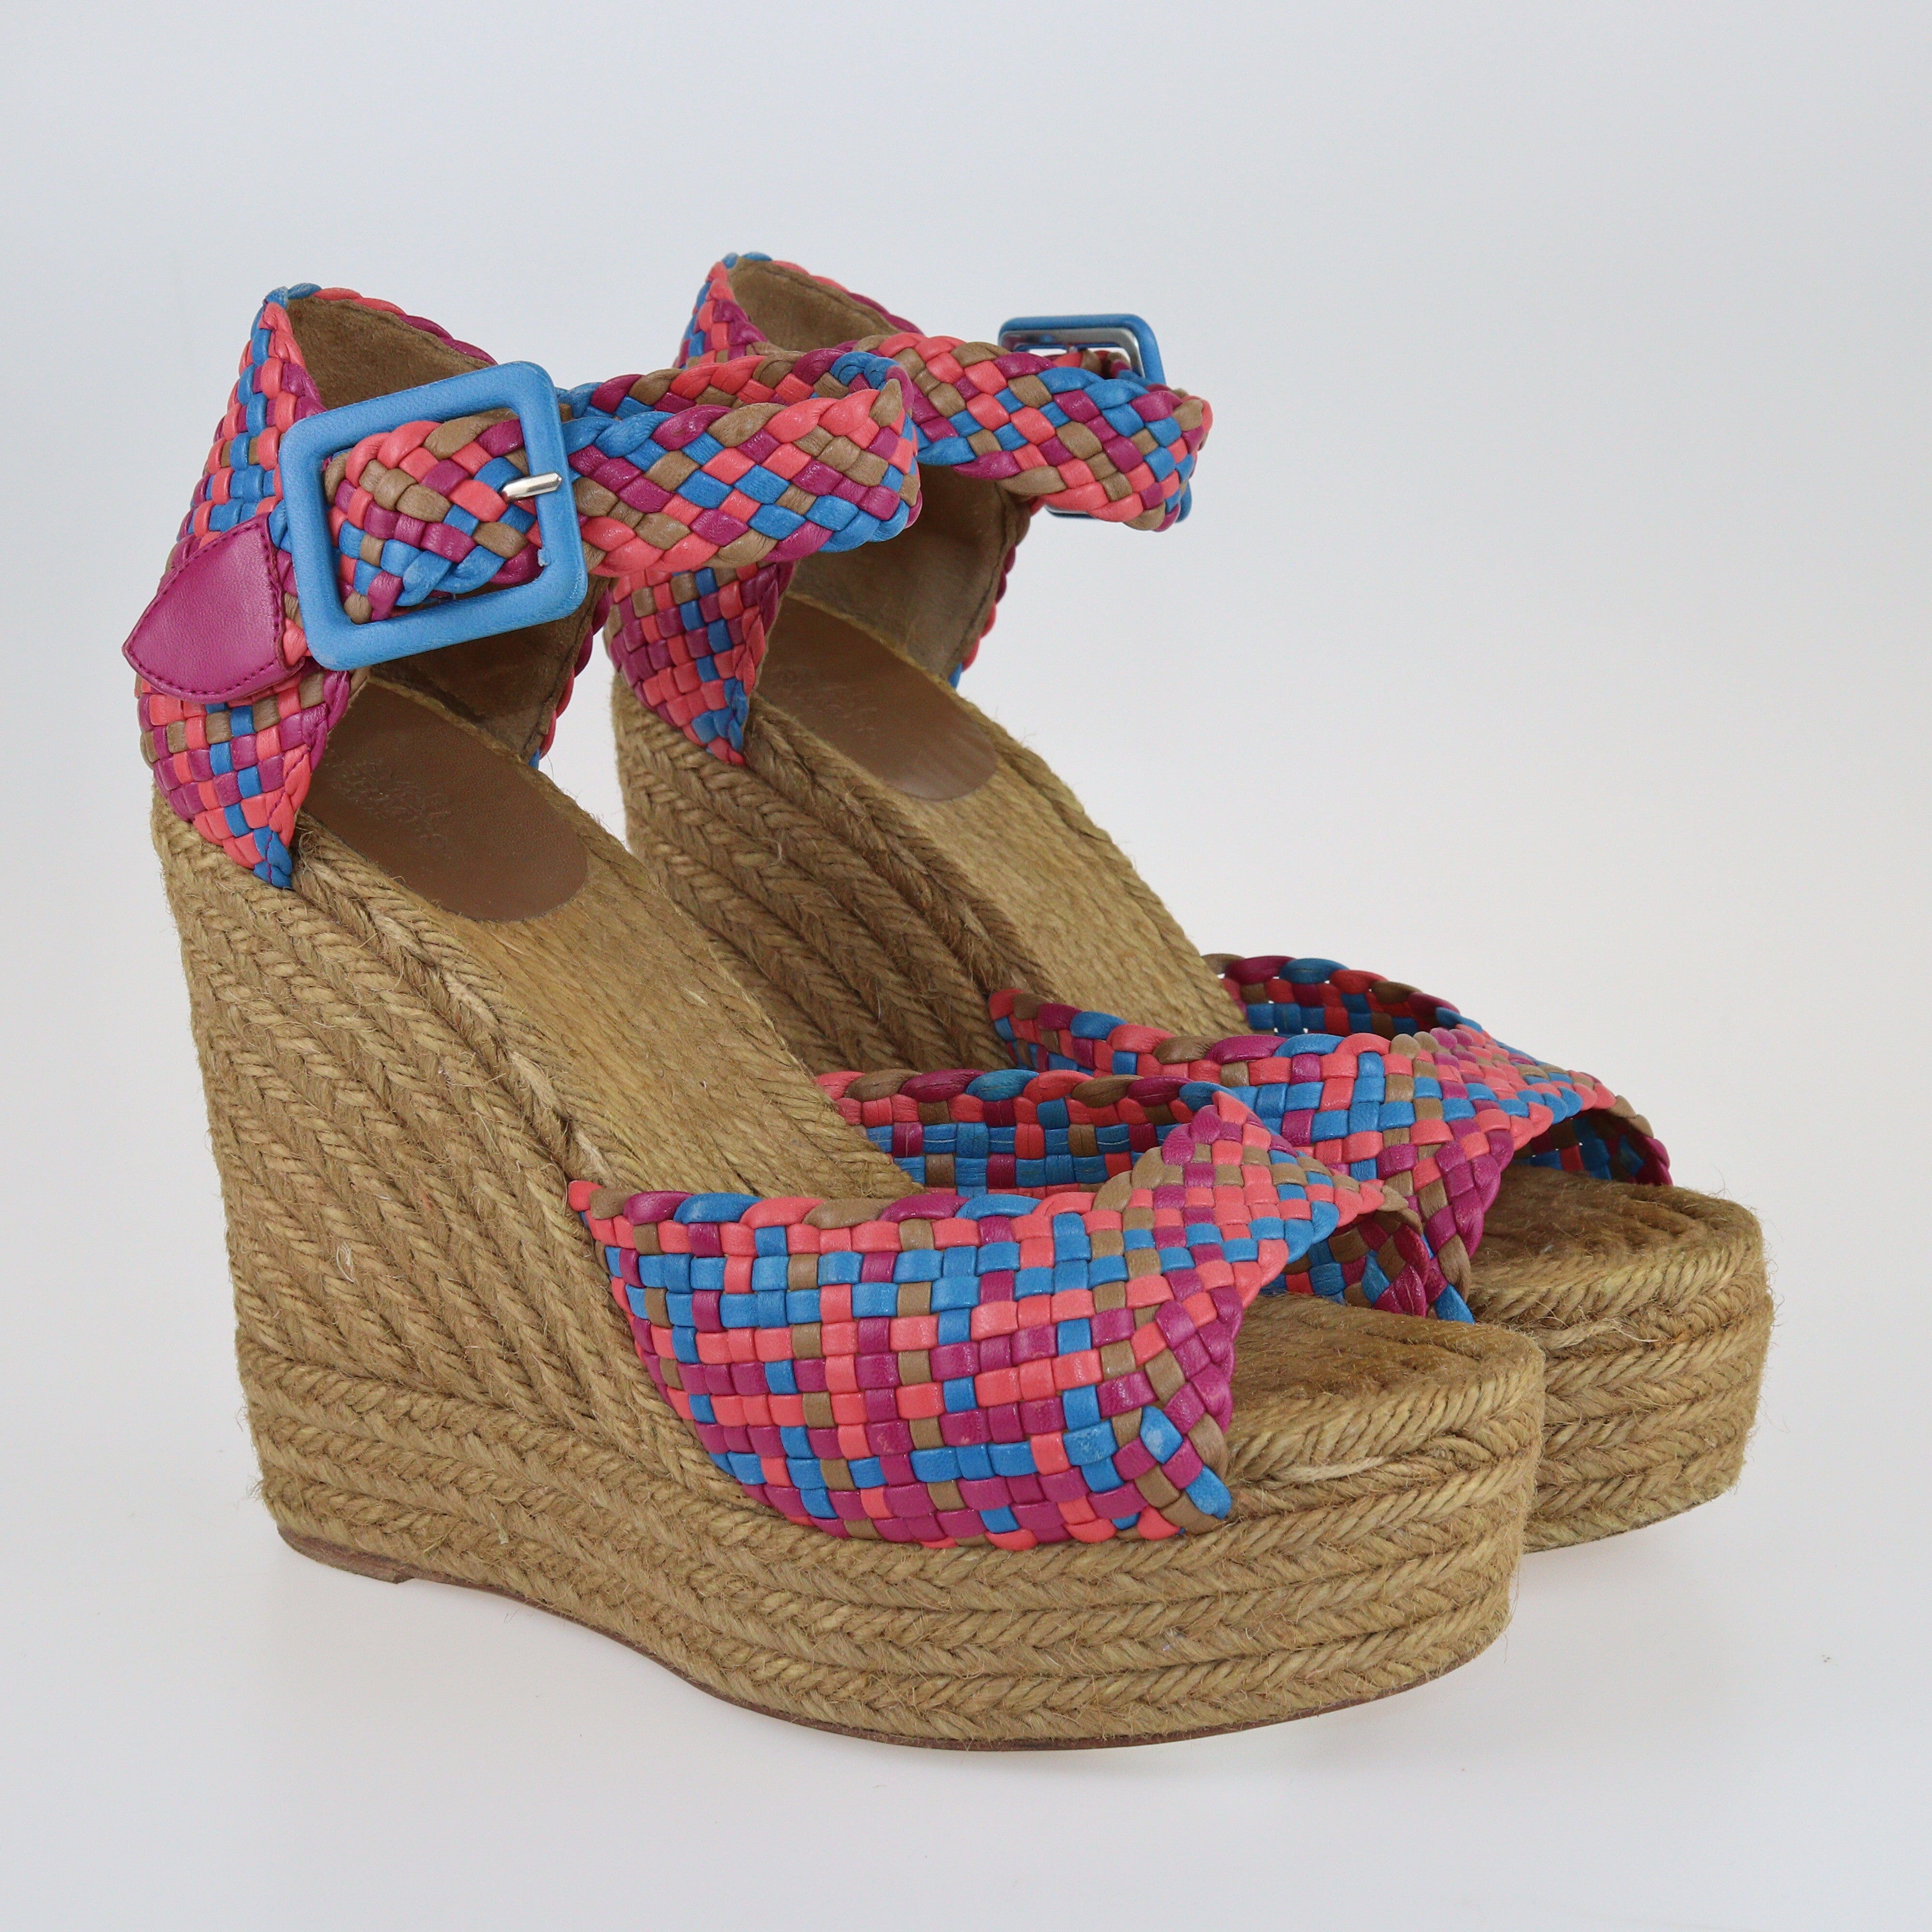 Hermes Multicolor Woven Leather Espadrille Wedge Sandals Shoes Hermes 